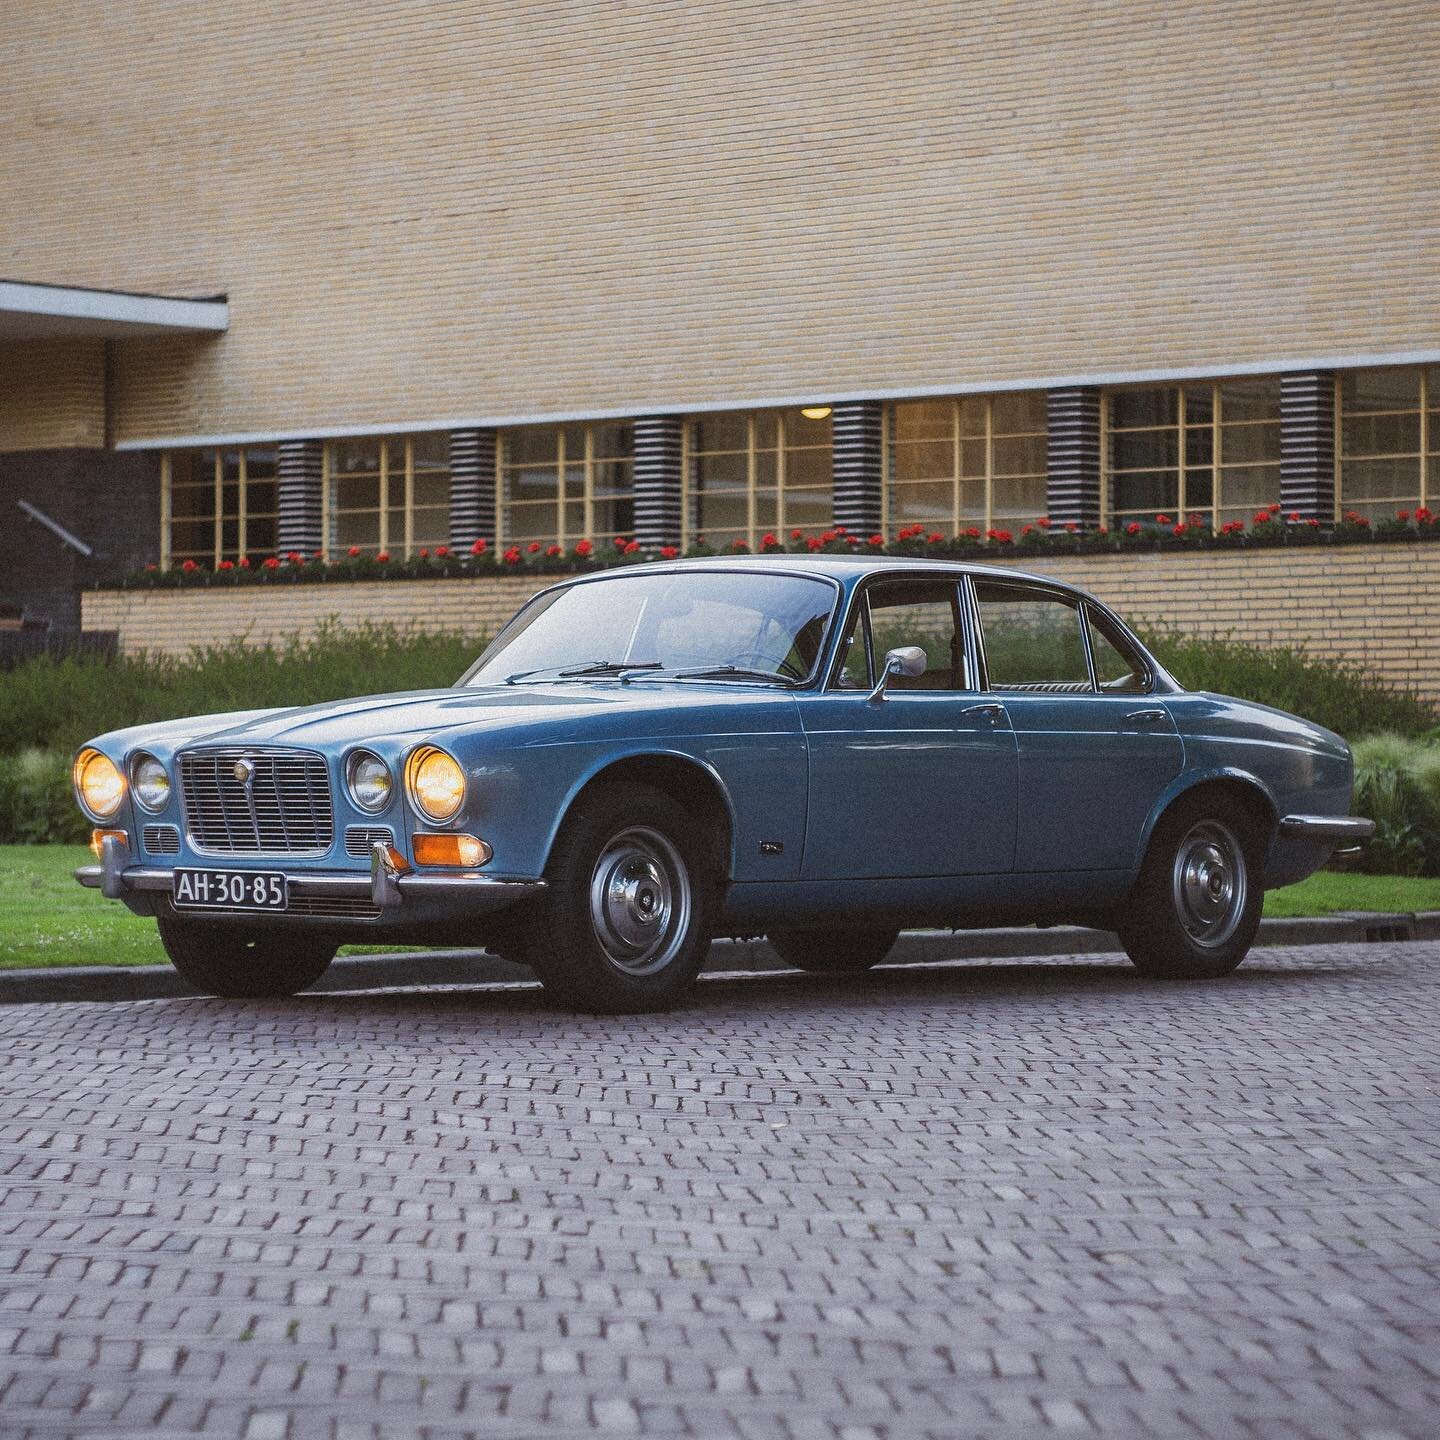 [🐆Jaguar XJ6 Series 1] The car that leaped Jaguar forward in the 1960&rsquo;s. The first of the XJ model line that would be the flagship for many years to come.

This particular example was born in May 1972 and sold on June 1972 in Paris, France. 

